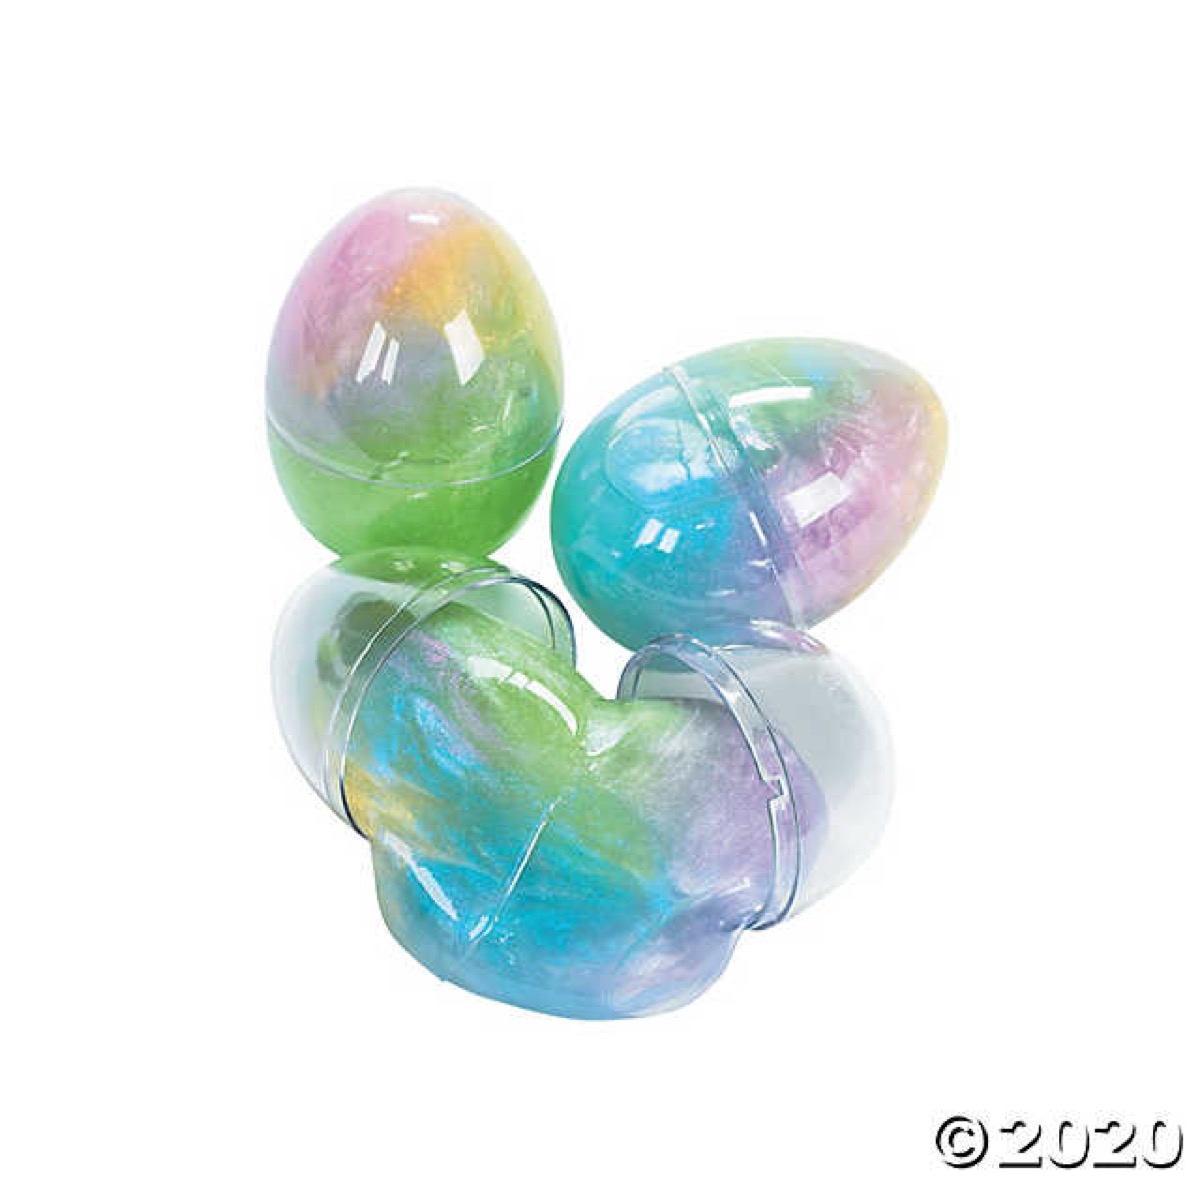 stack of glittery eggs with slime in them